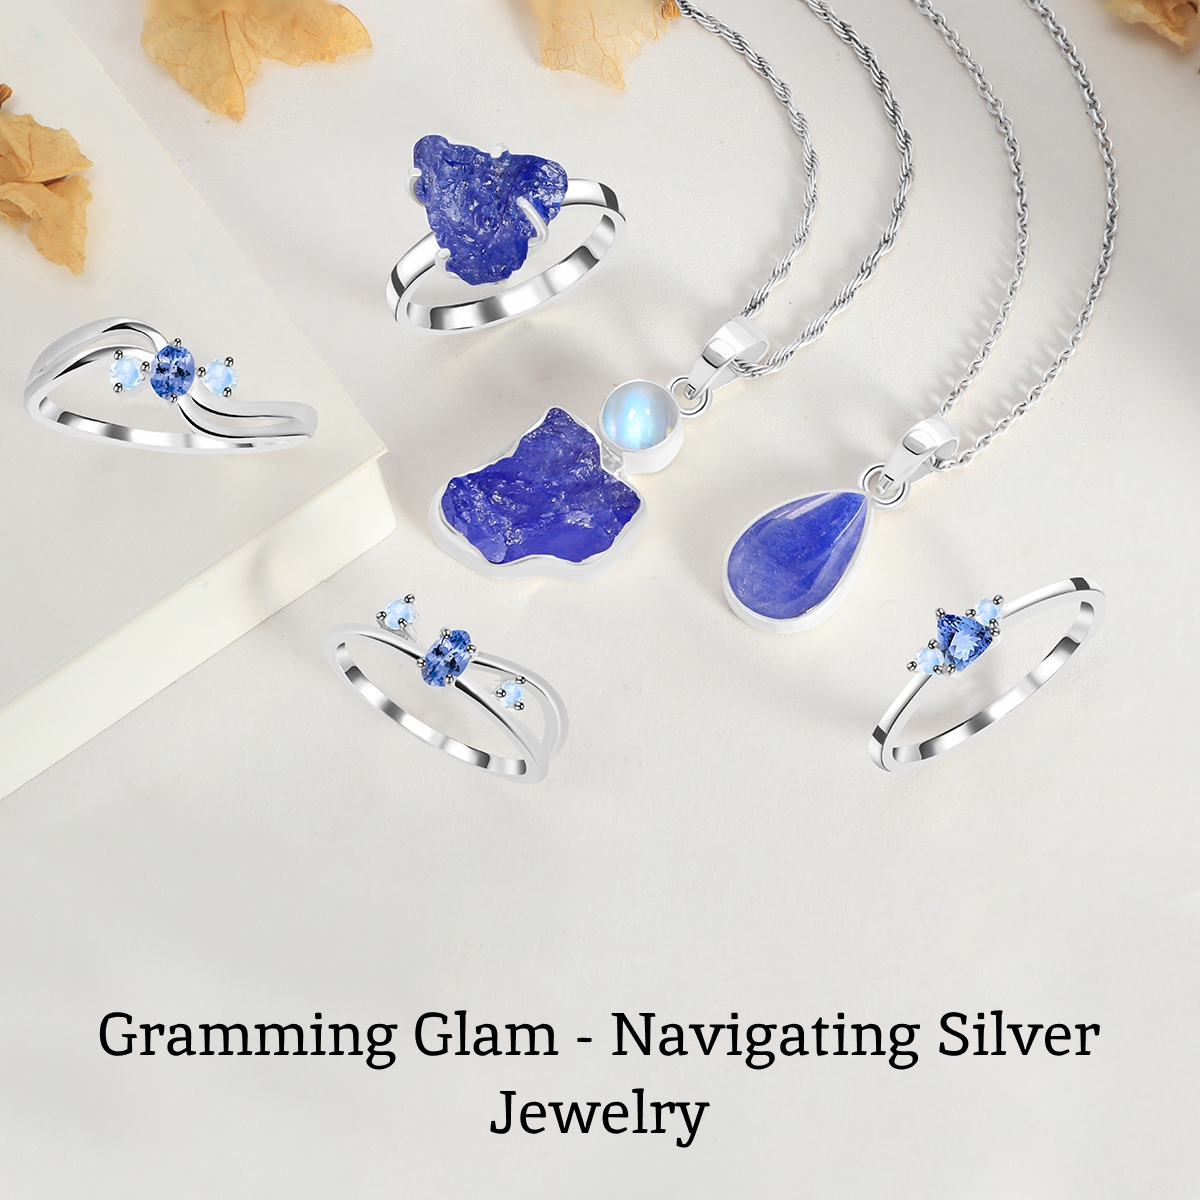 Things You Need To Consider When Buying Silver Jewelry By Gram